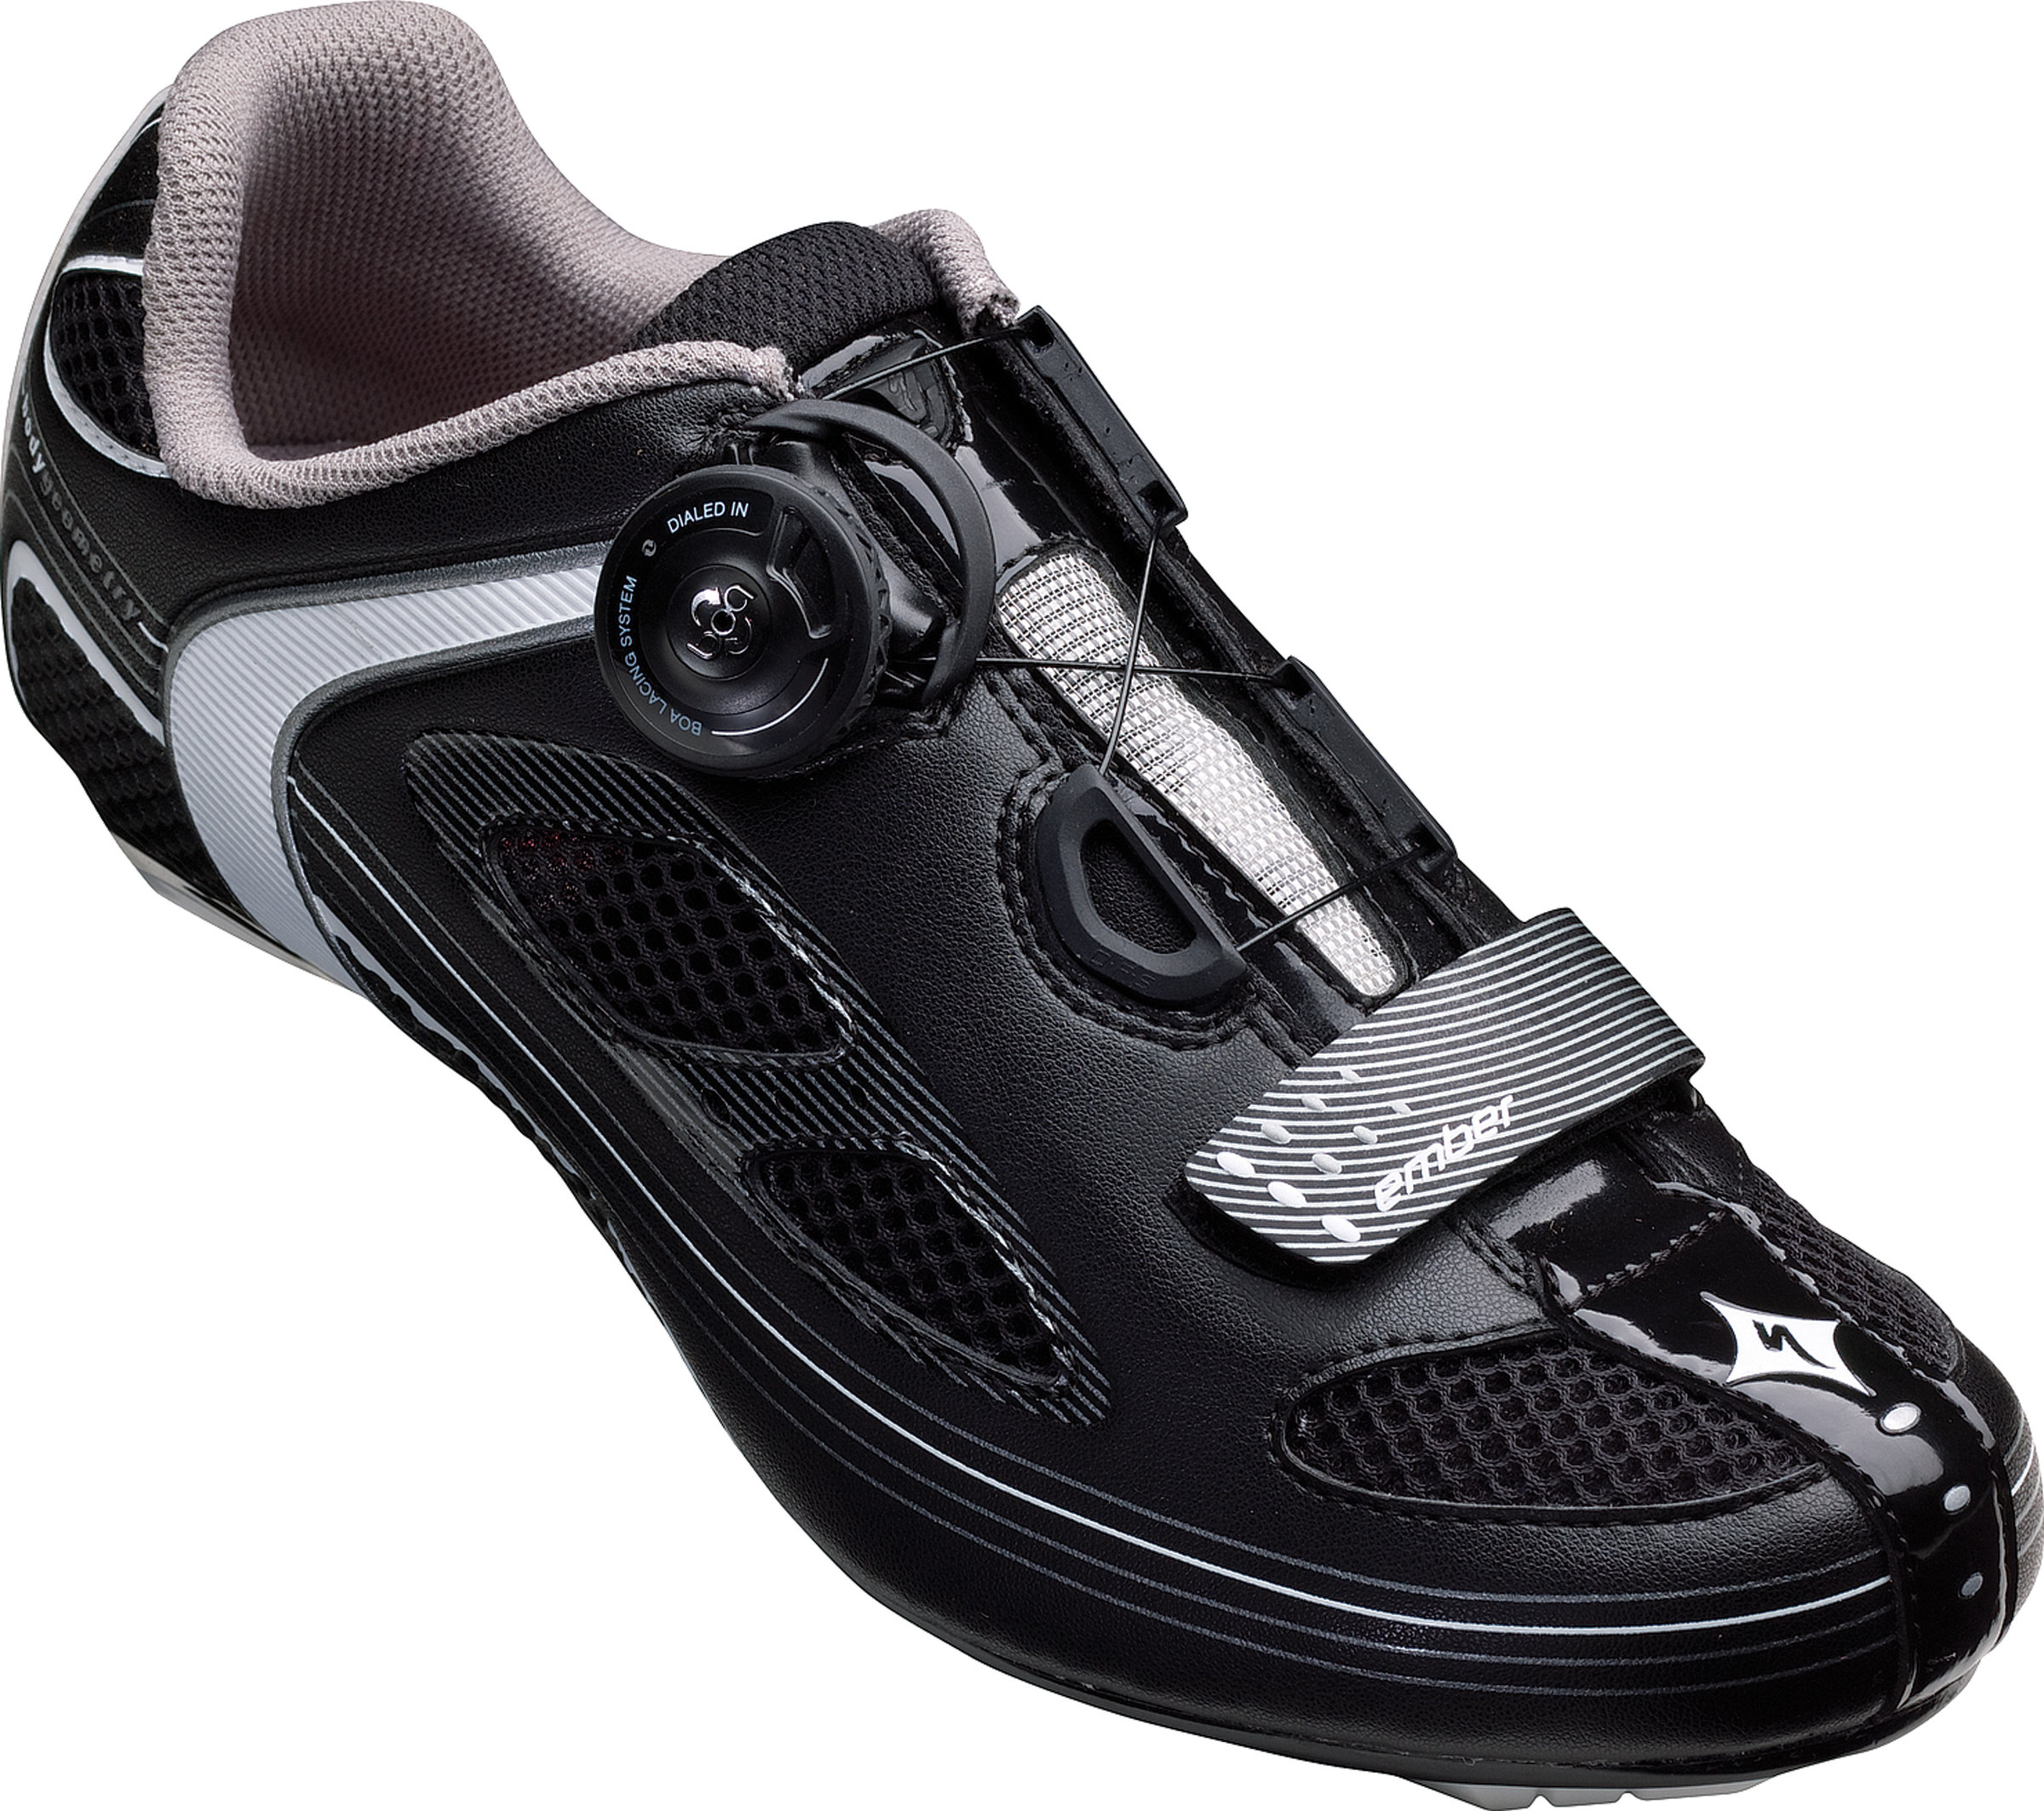 FREE SHIPPING Specialized Ember RD WMN Bike Shoes NEW IN BOX! 